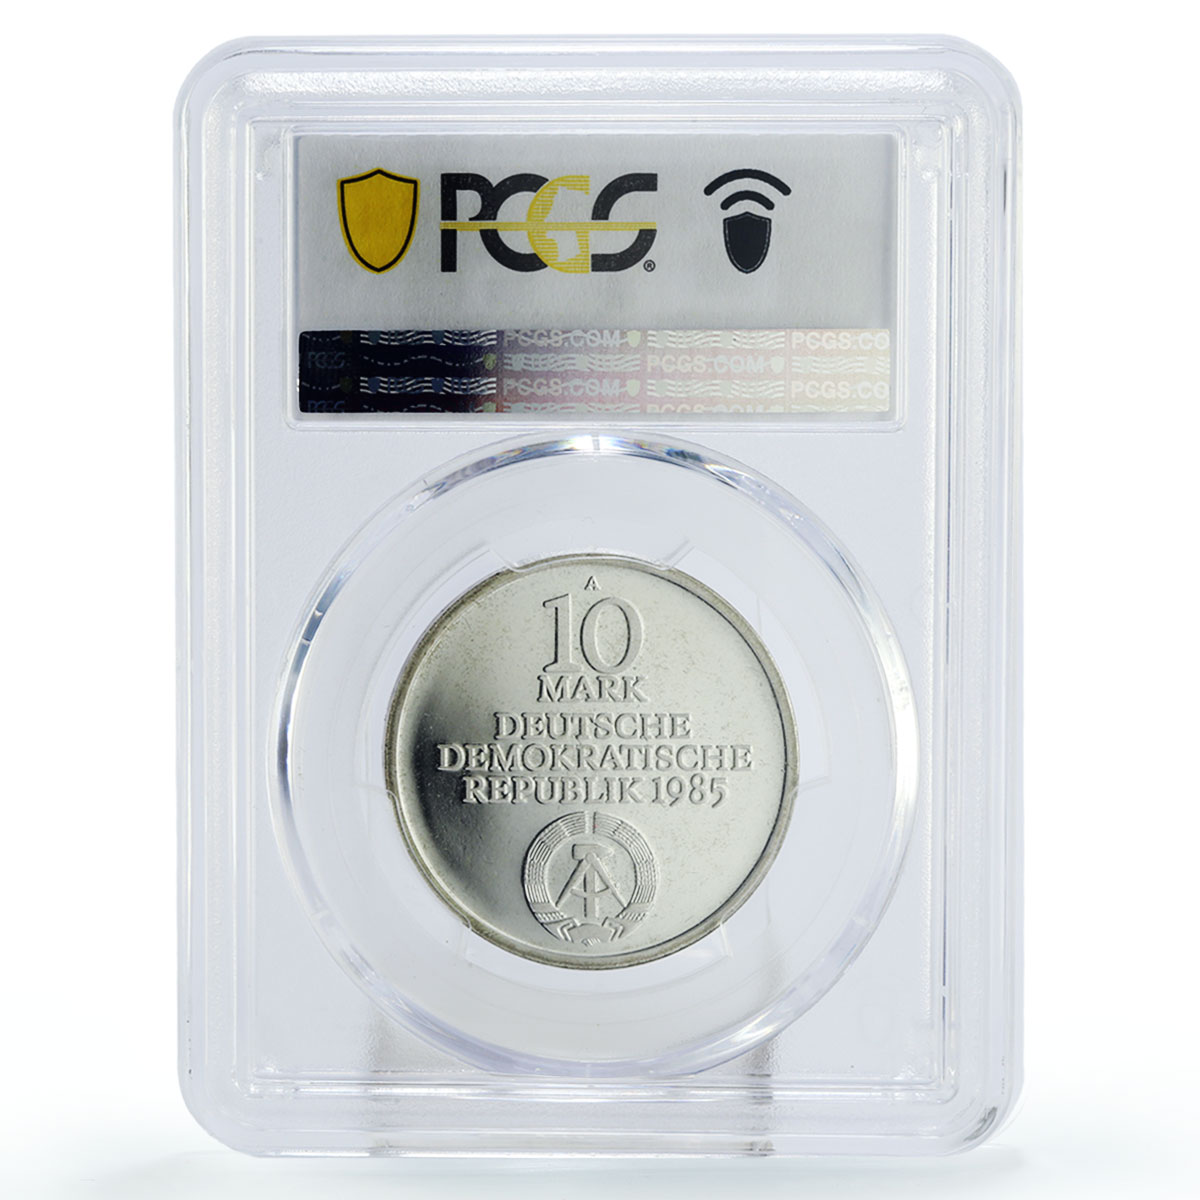 Germany DDR 10 mark 175 Years of Humboldt University PR66 PCGS silver coin 1985